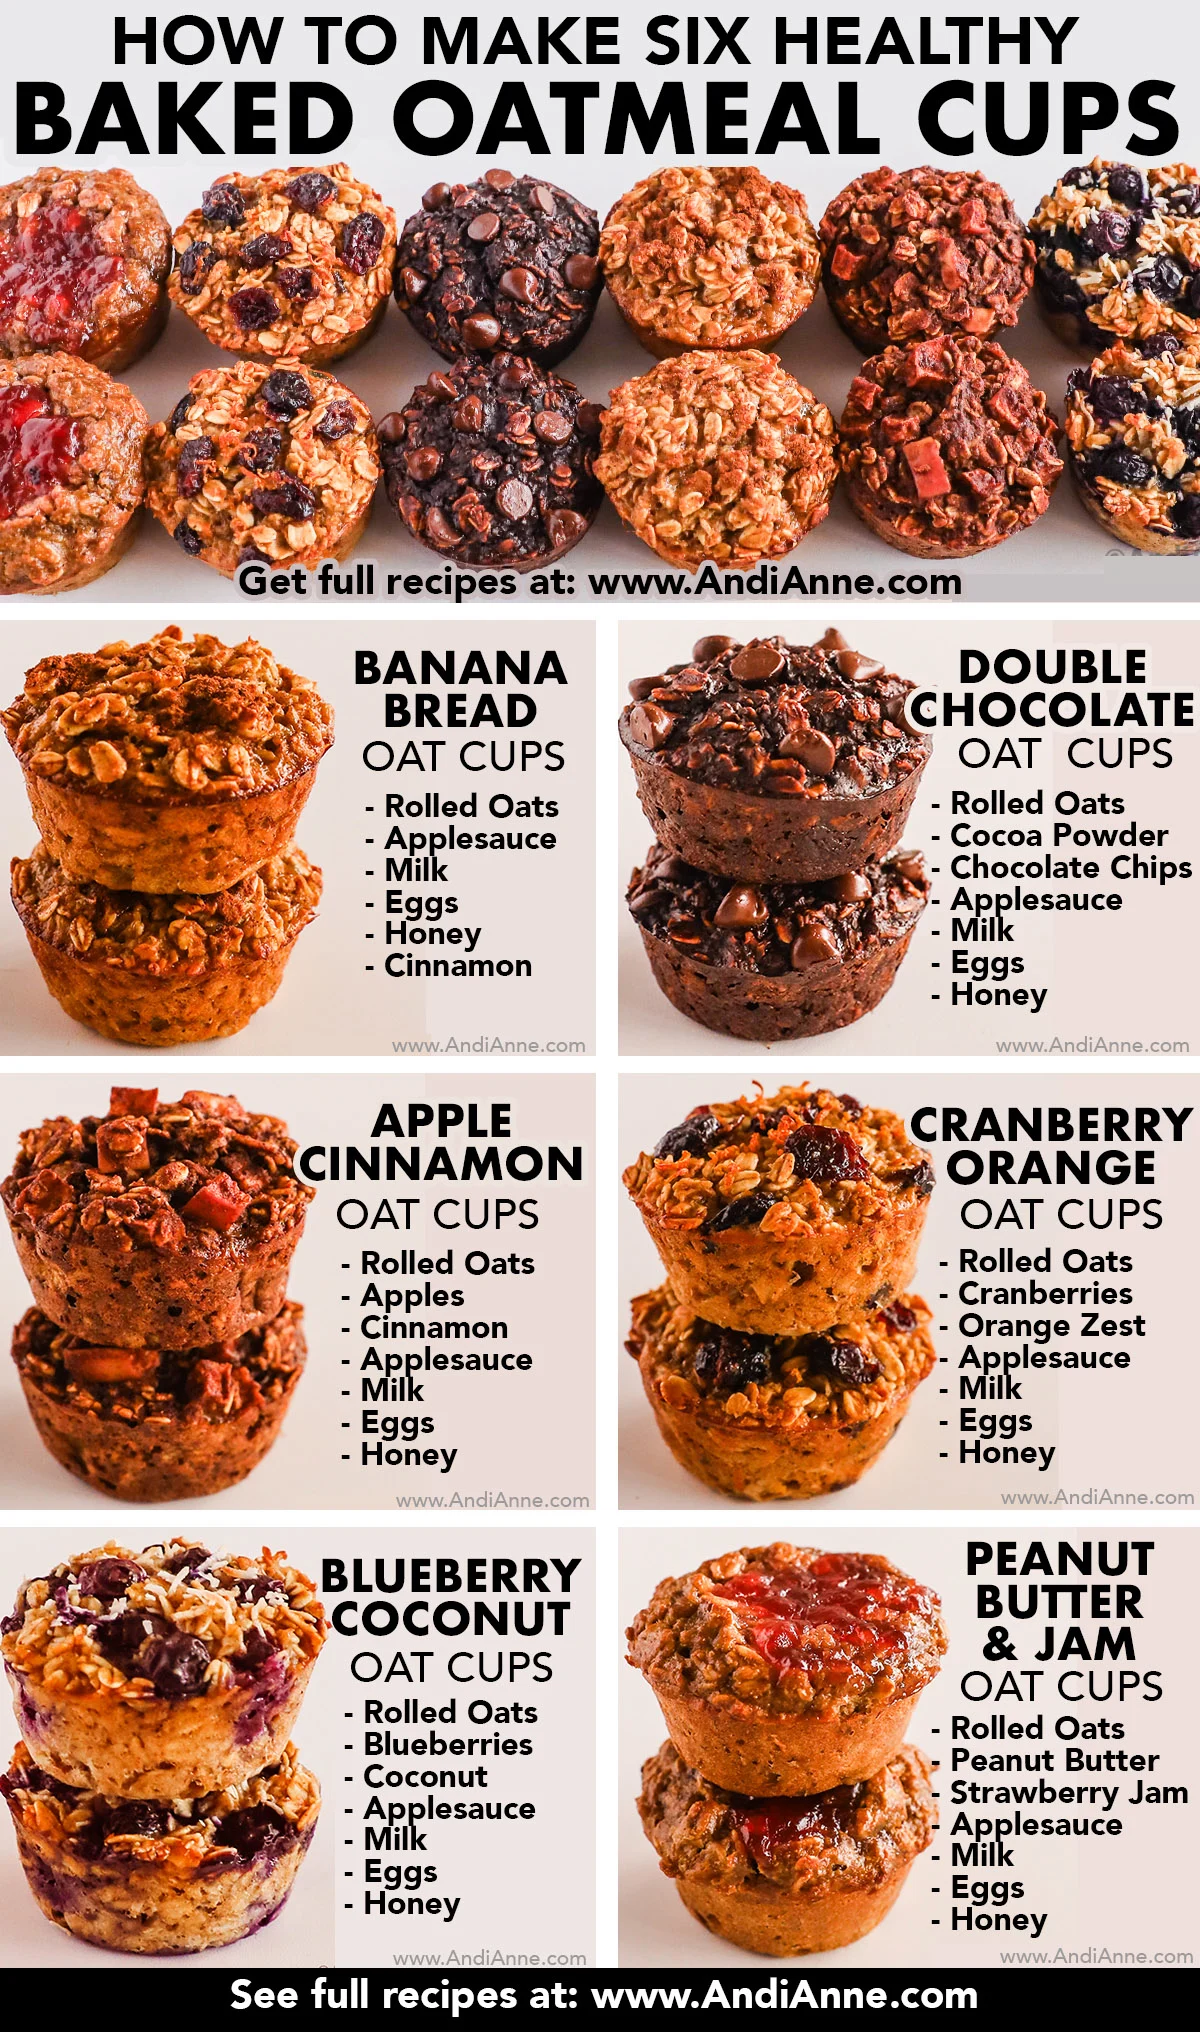 Six baked oatmeal cup flavors shown separately with a list of ingredients for each. Flavors include the base recipe, double chocolate, apple cinnamon, cranberry orange, blueberry coconut, and peanut butter jam.